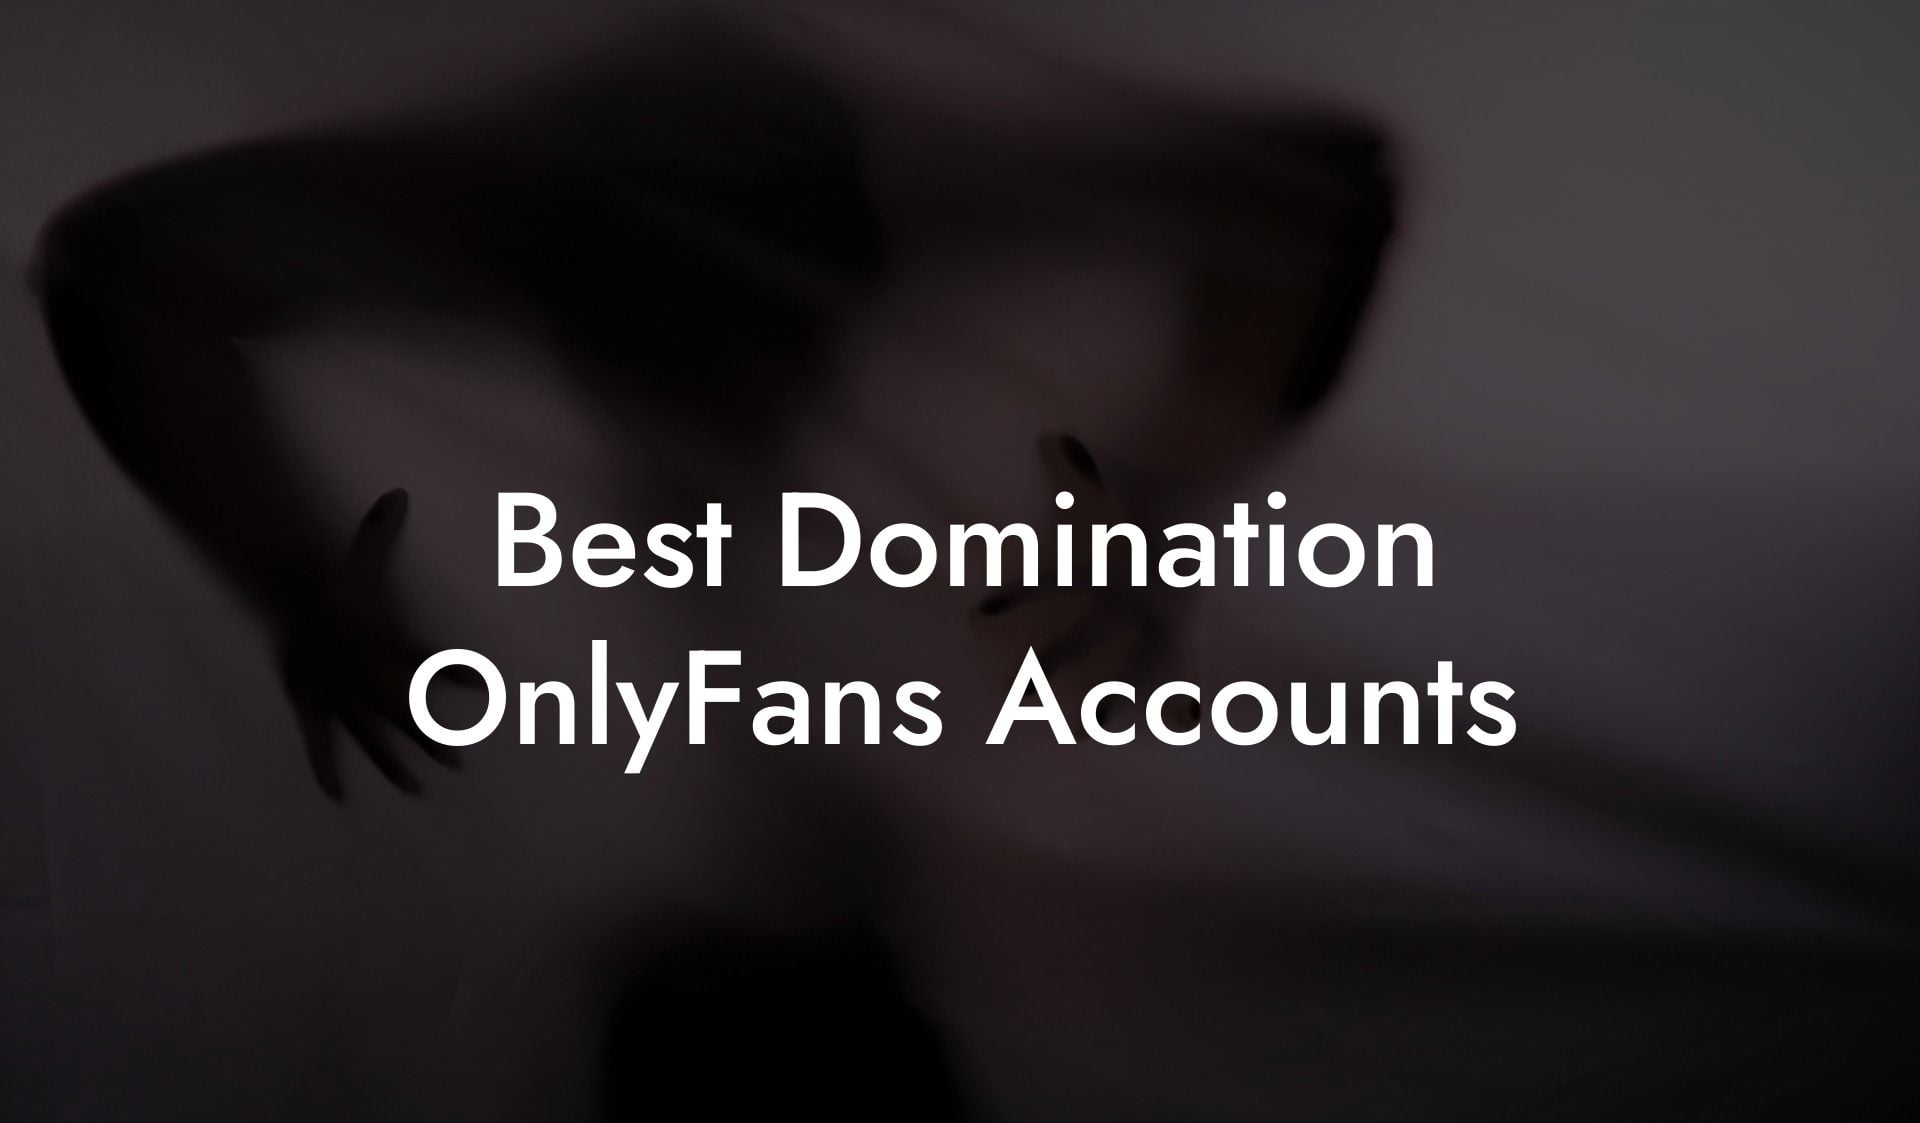 Best Domination OnlyFans Accounts